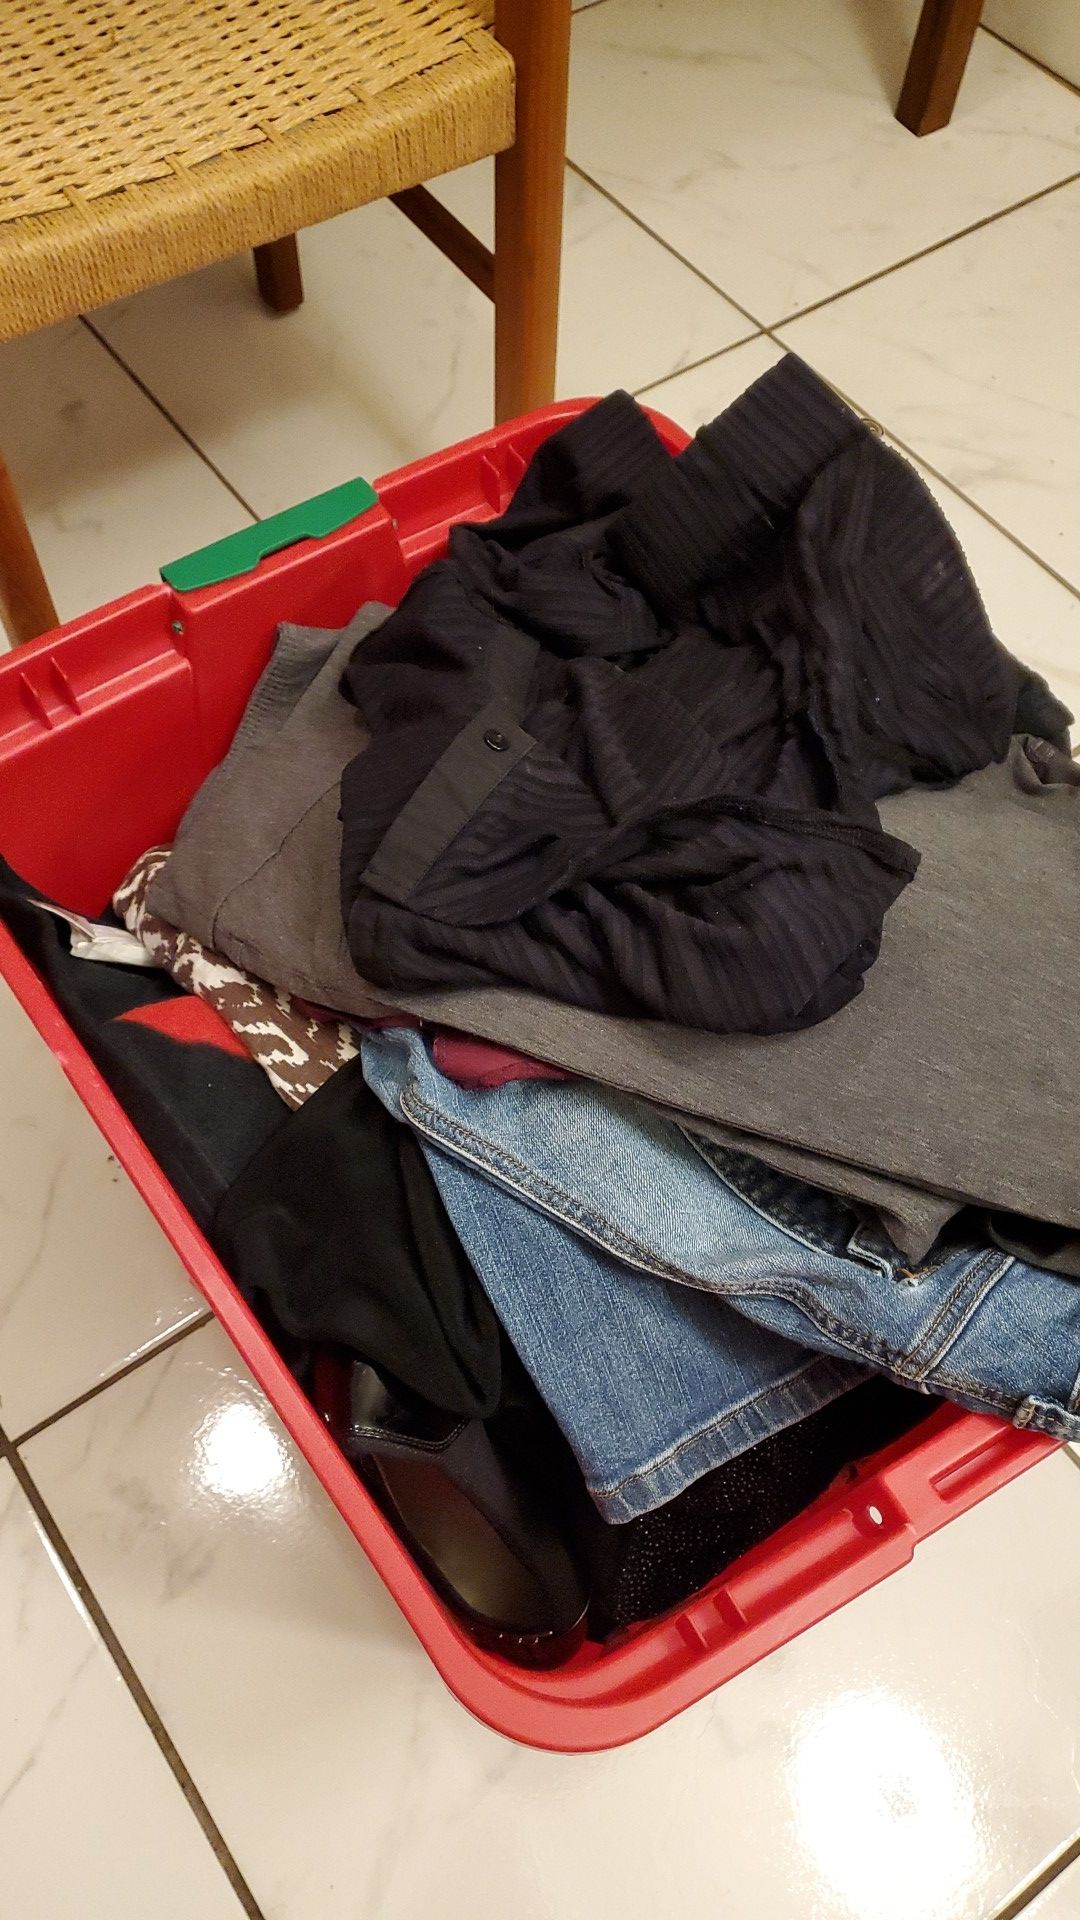 Free big tub of women's clothes with a tub